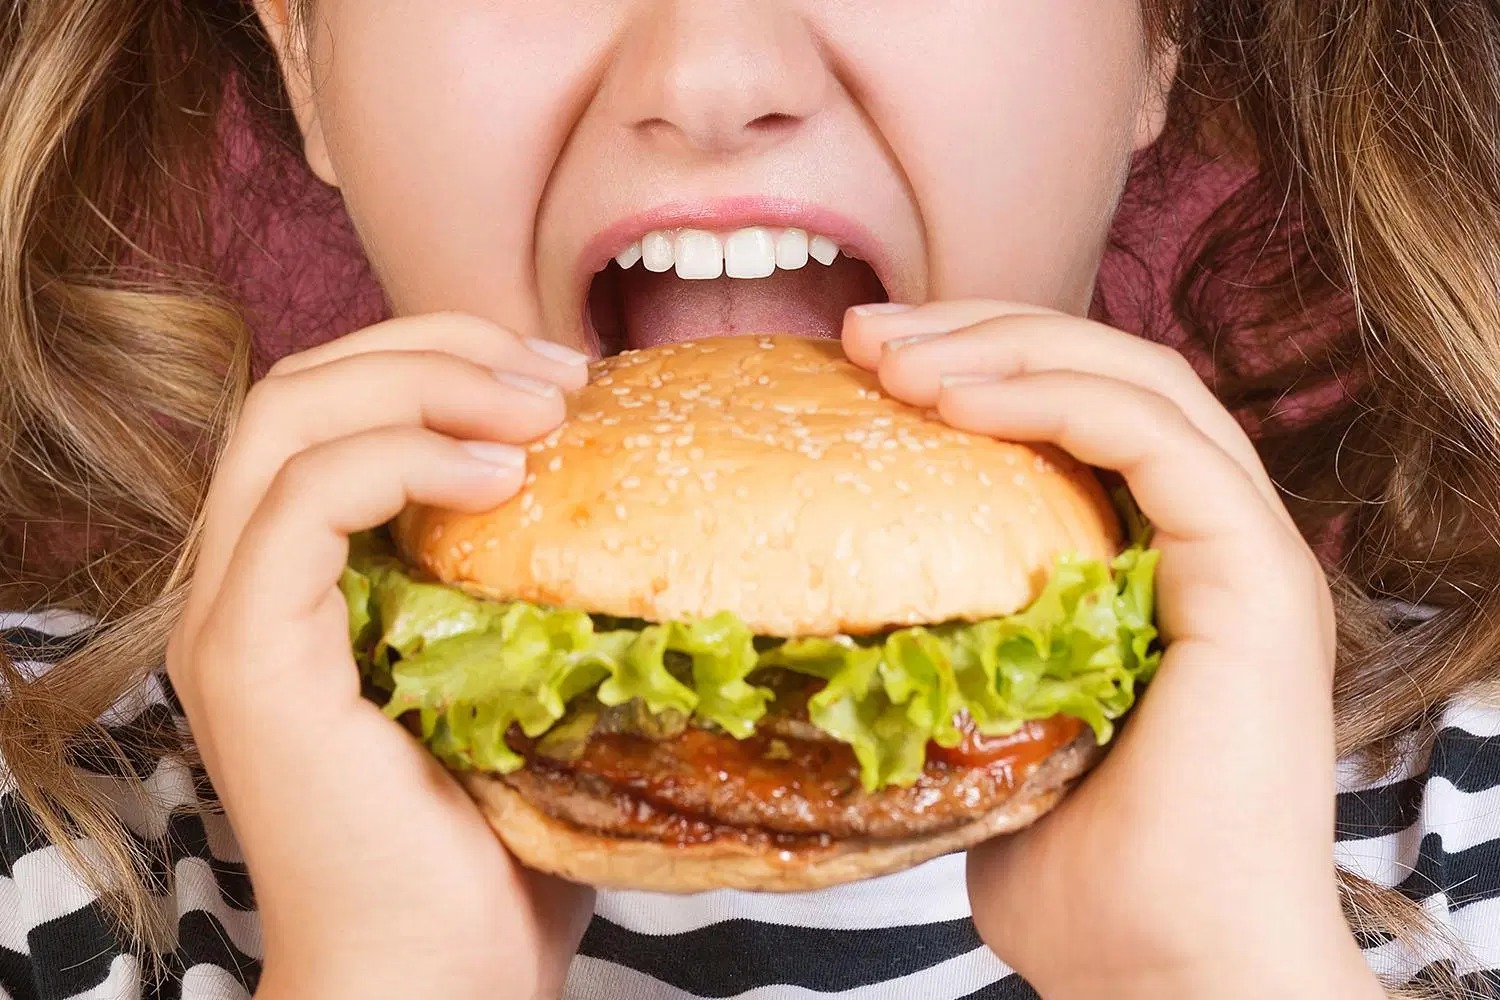 🍟 If You’ve Eaten 14/22 of These Foods in the Past Month, Then You’re Probably a Fussy Eater Eating Burger